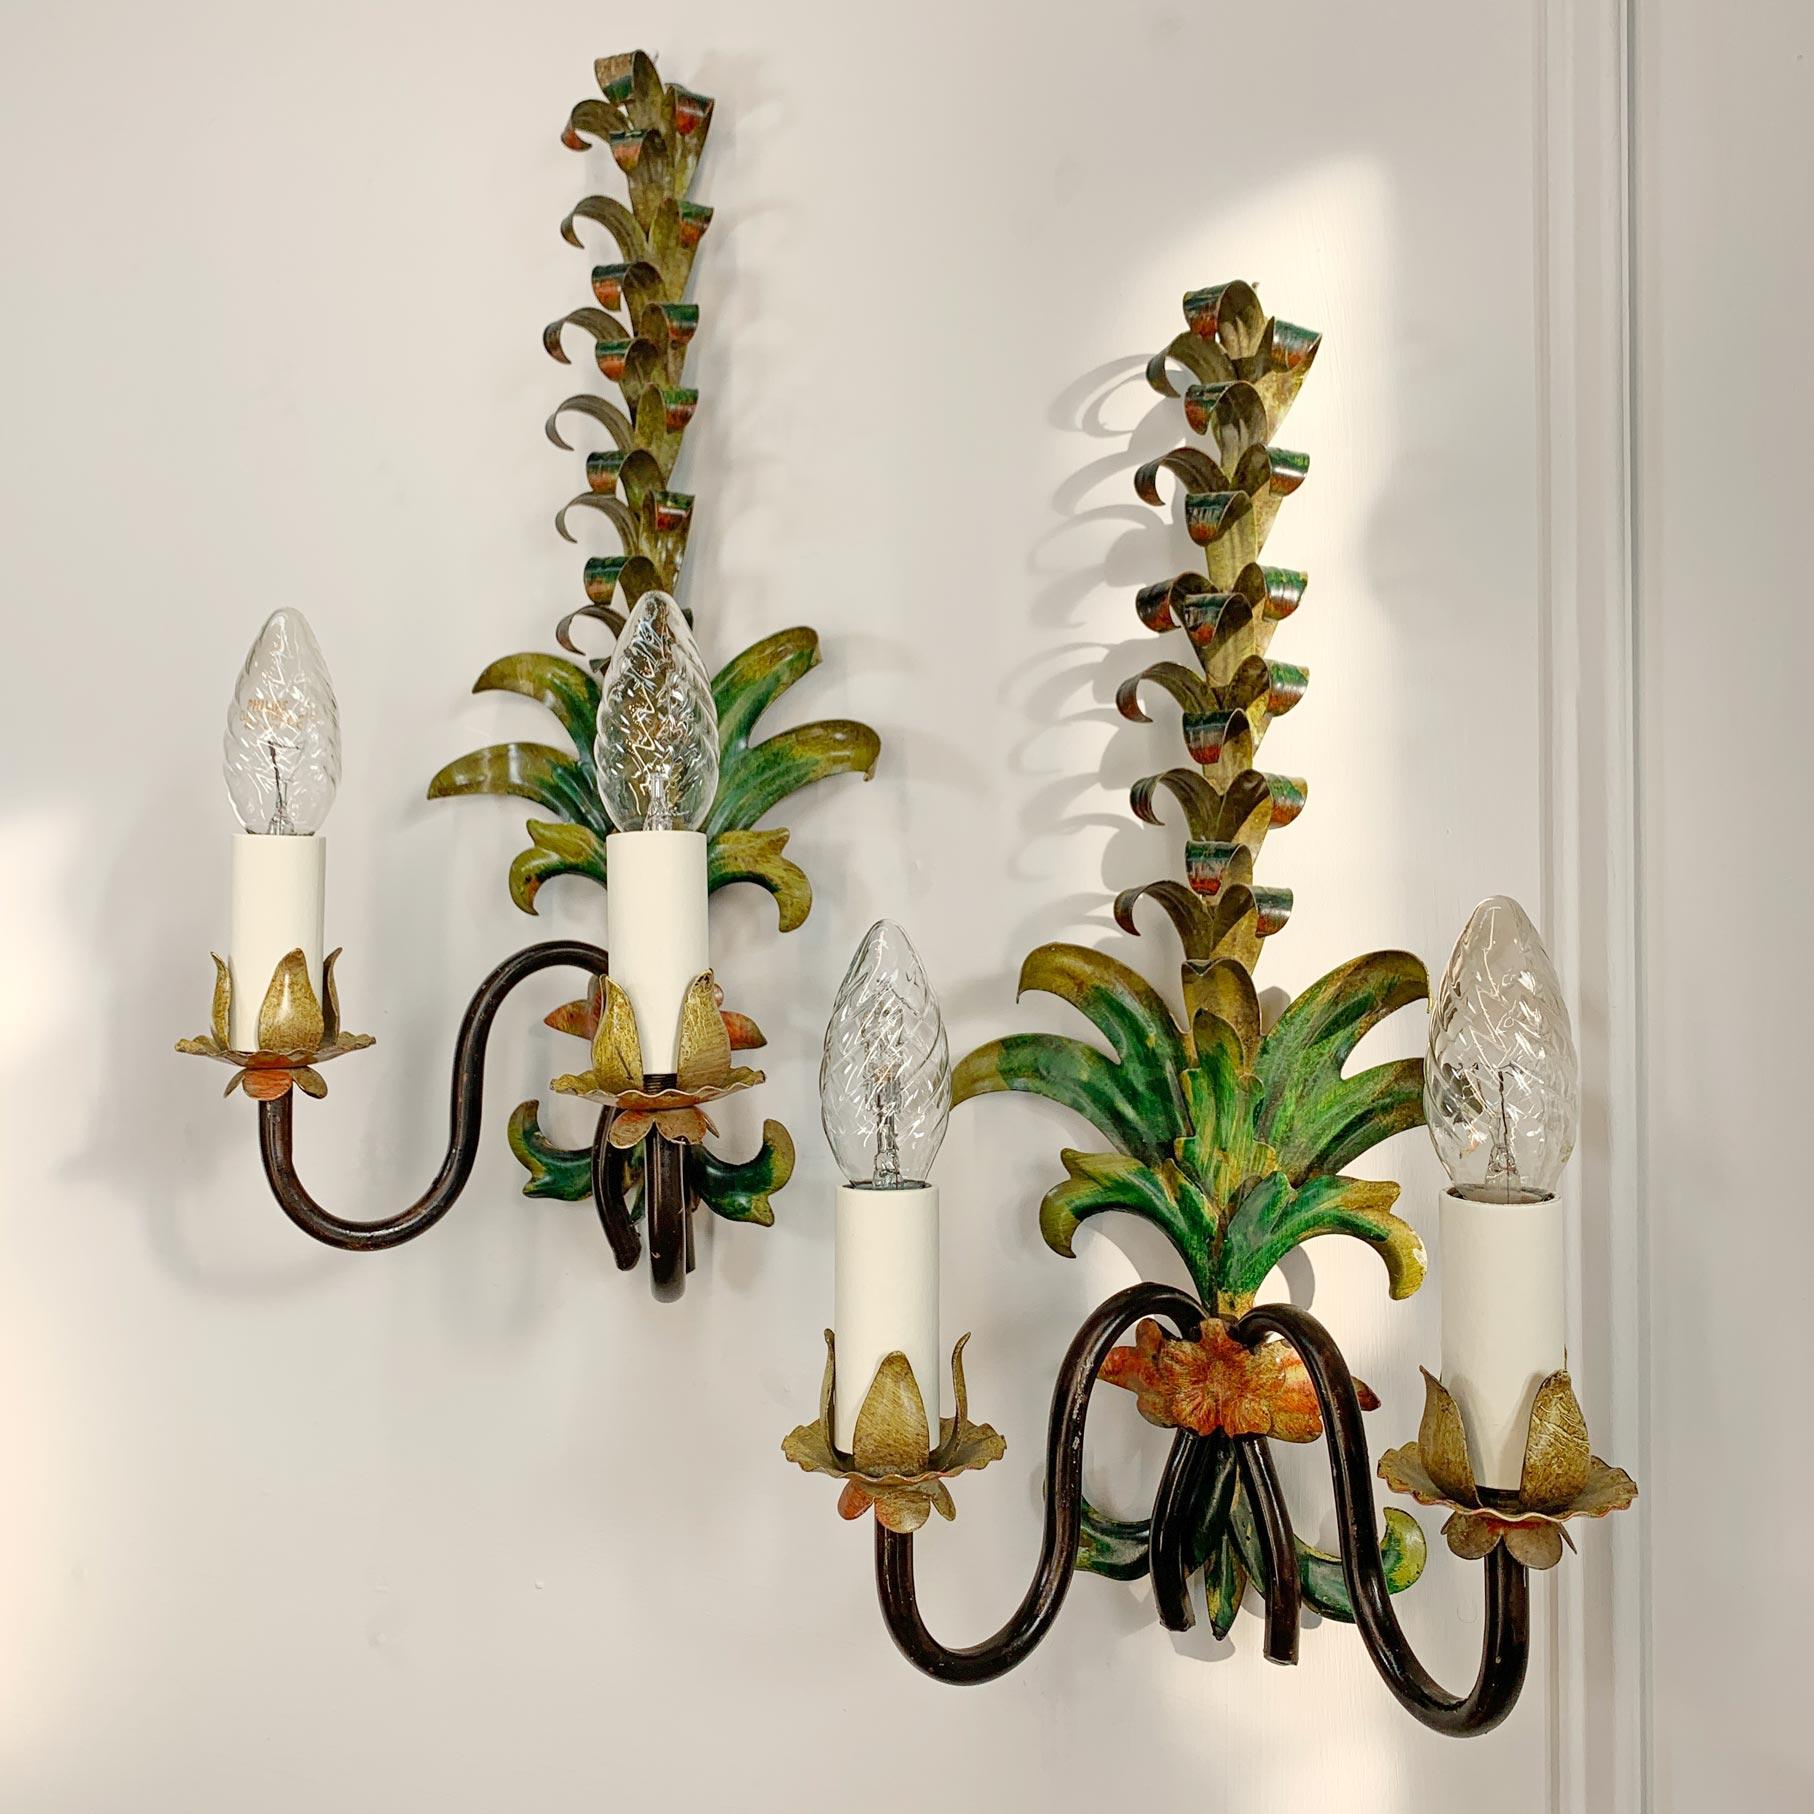 A hand panted pair of Italian wall lights, modeled as tall palm fronds, dating to the 1950's.

Each light has two e14 (small screw in bulb) lamp holders.

Height 41cm, Width 21cm, Depth 14.5cm

Fully rewired and PAT tested.

Price is for the pair of